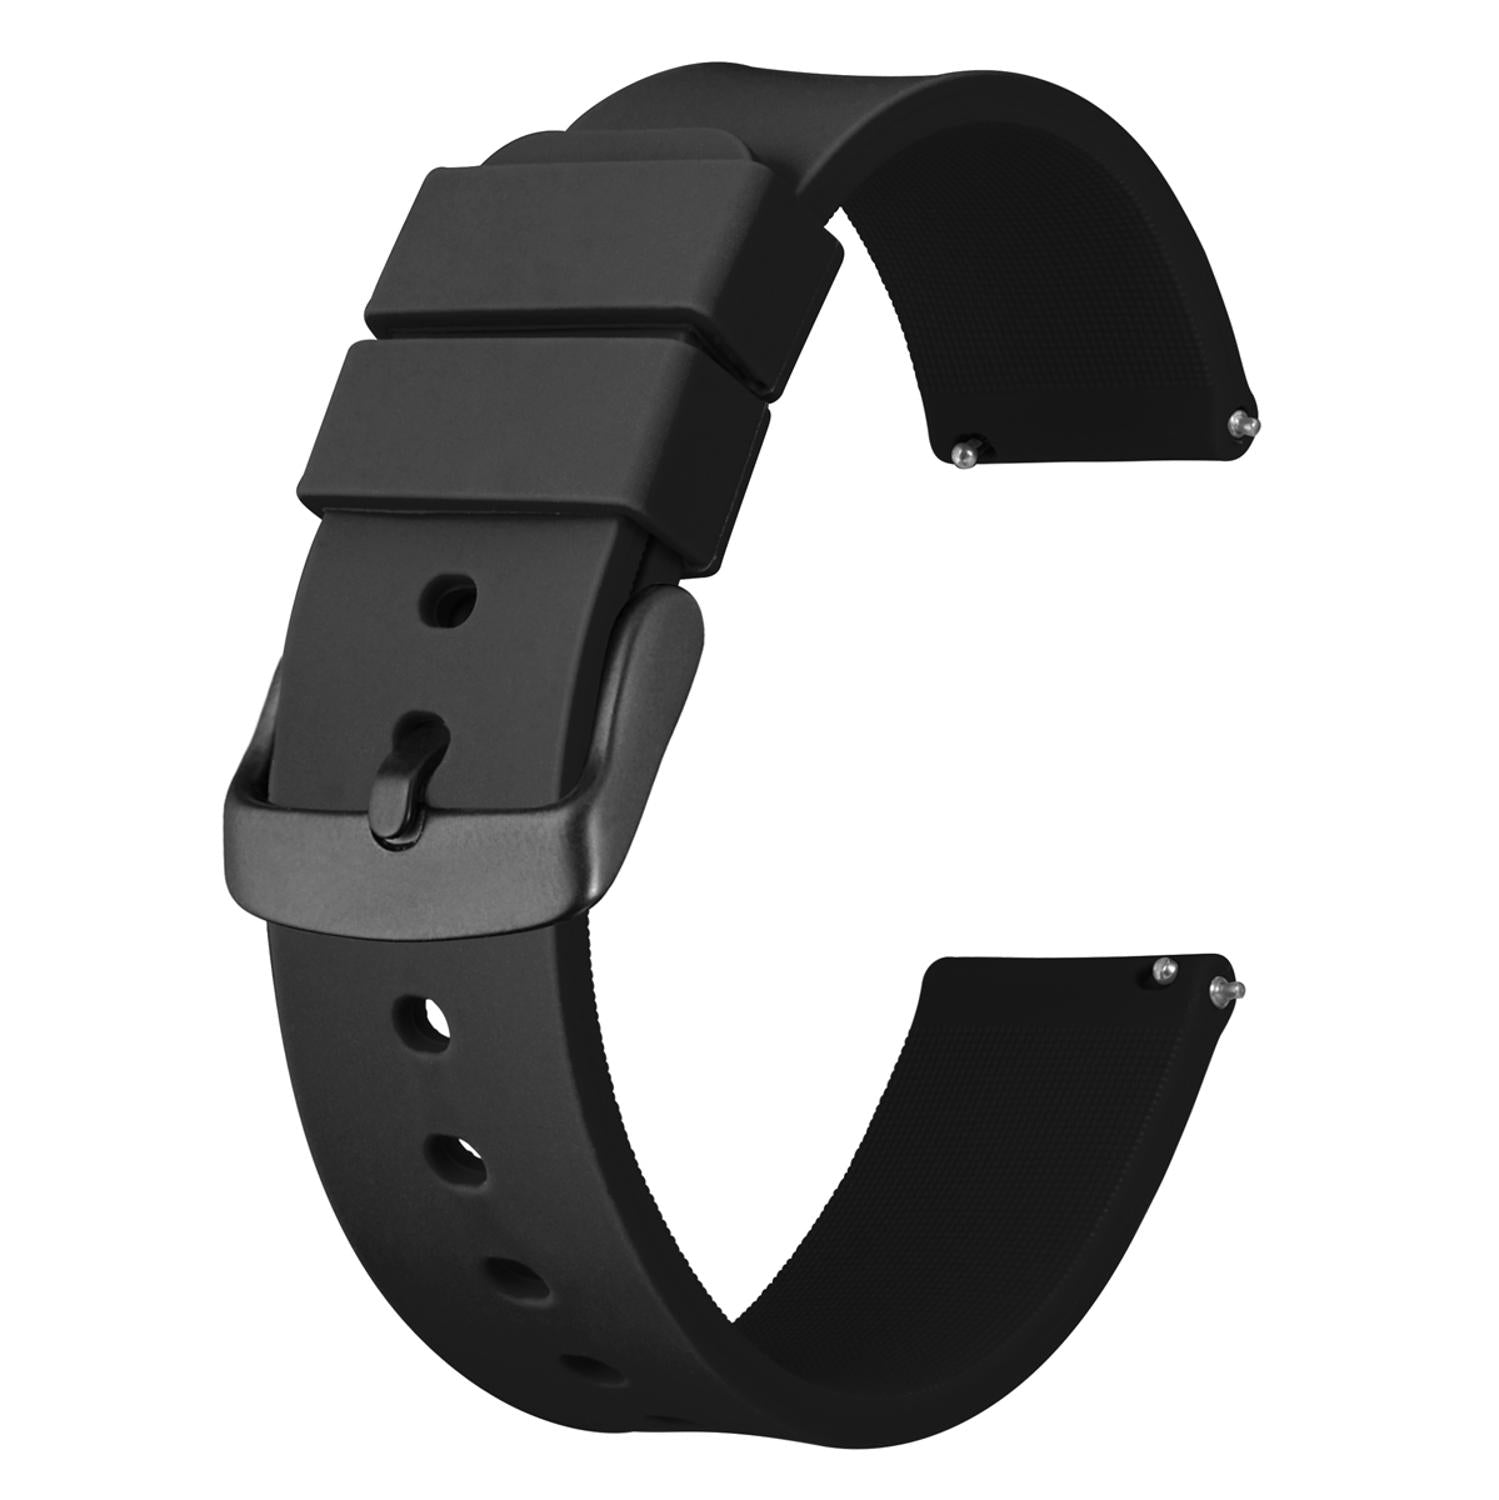 Anbeer Rubber Watchband 14Mm 18Mm 20Mm 22Mm 24Mm Quick Release Replacement Bracelet Men Black Sport Silicone Watch Strap Bands